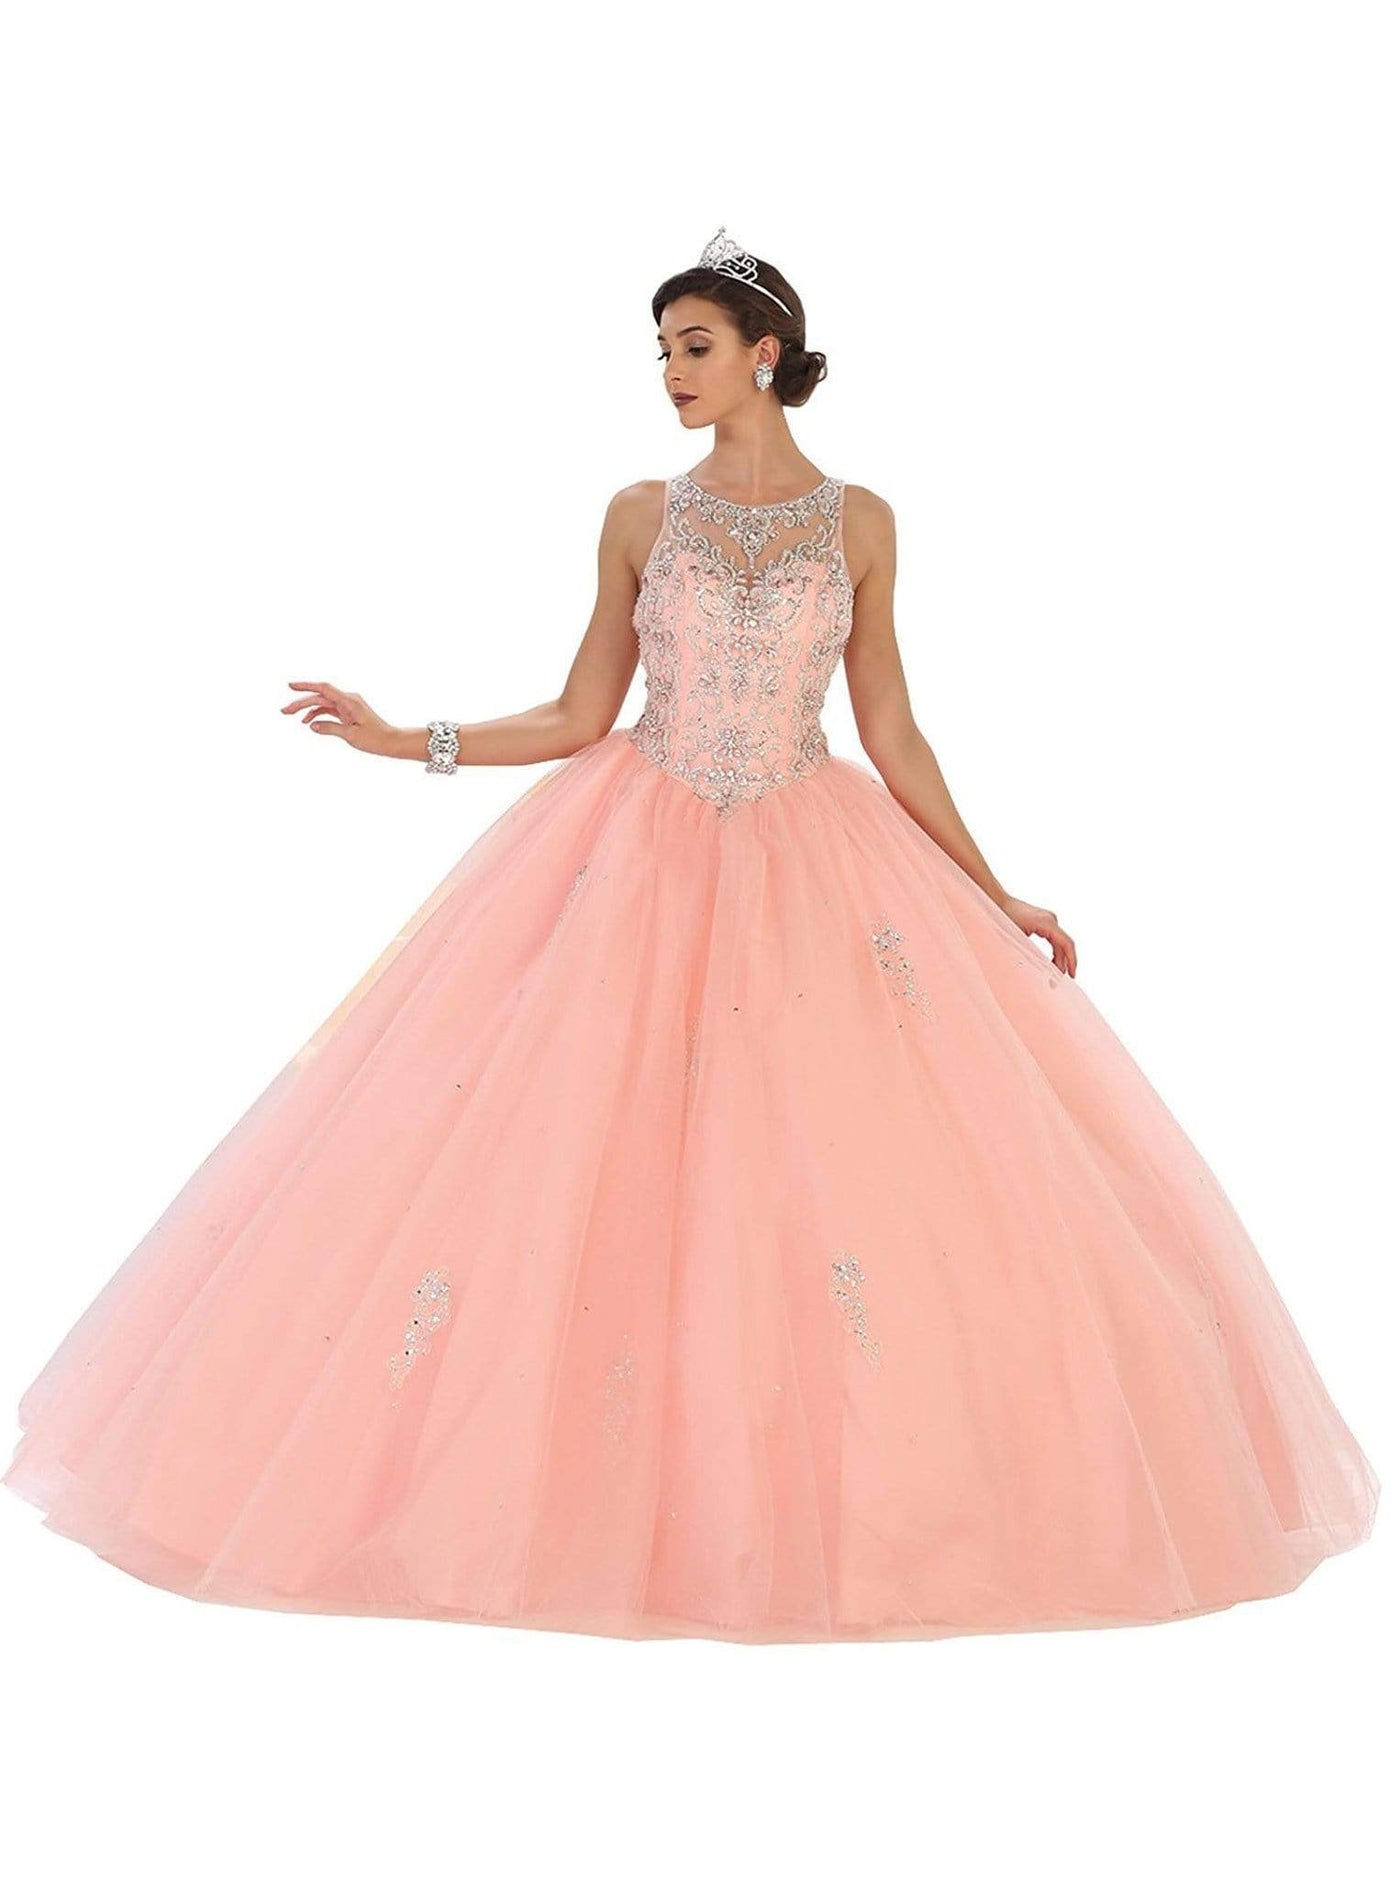 May Queen - Crystal Embellished Jewel Quinceanera Ballgown Quinceanera Dresses 2 / Blush